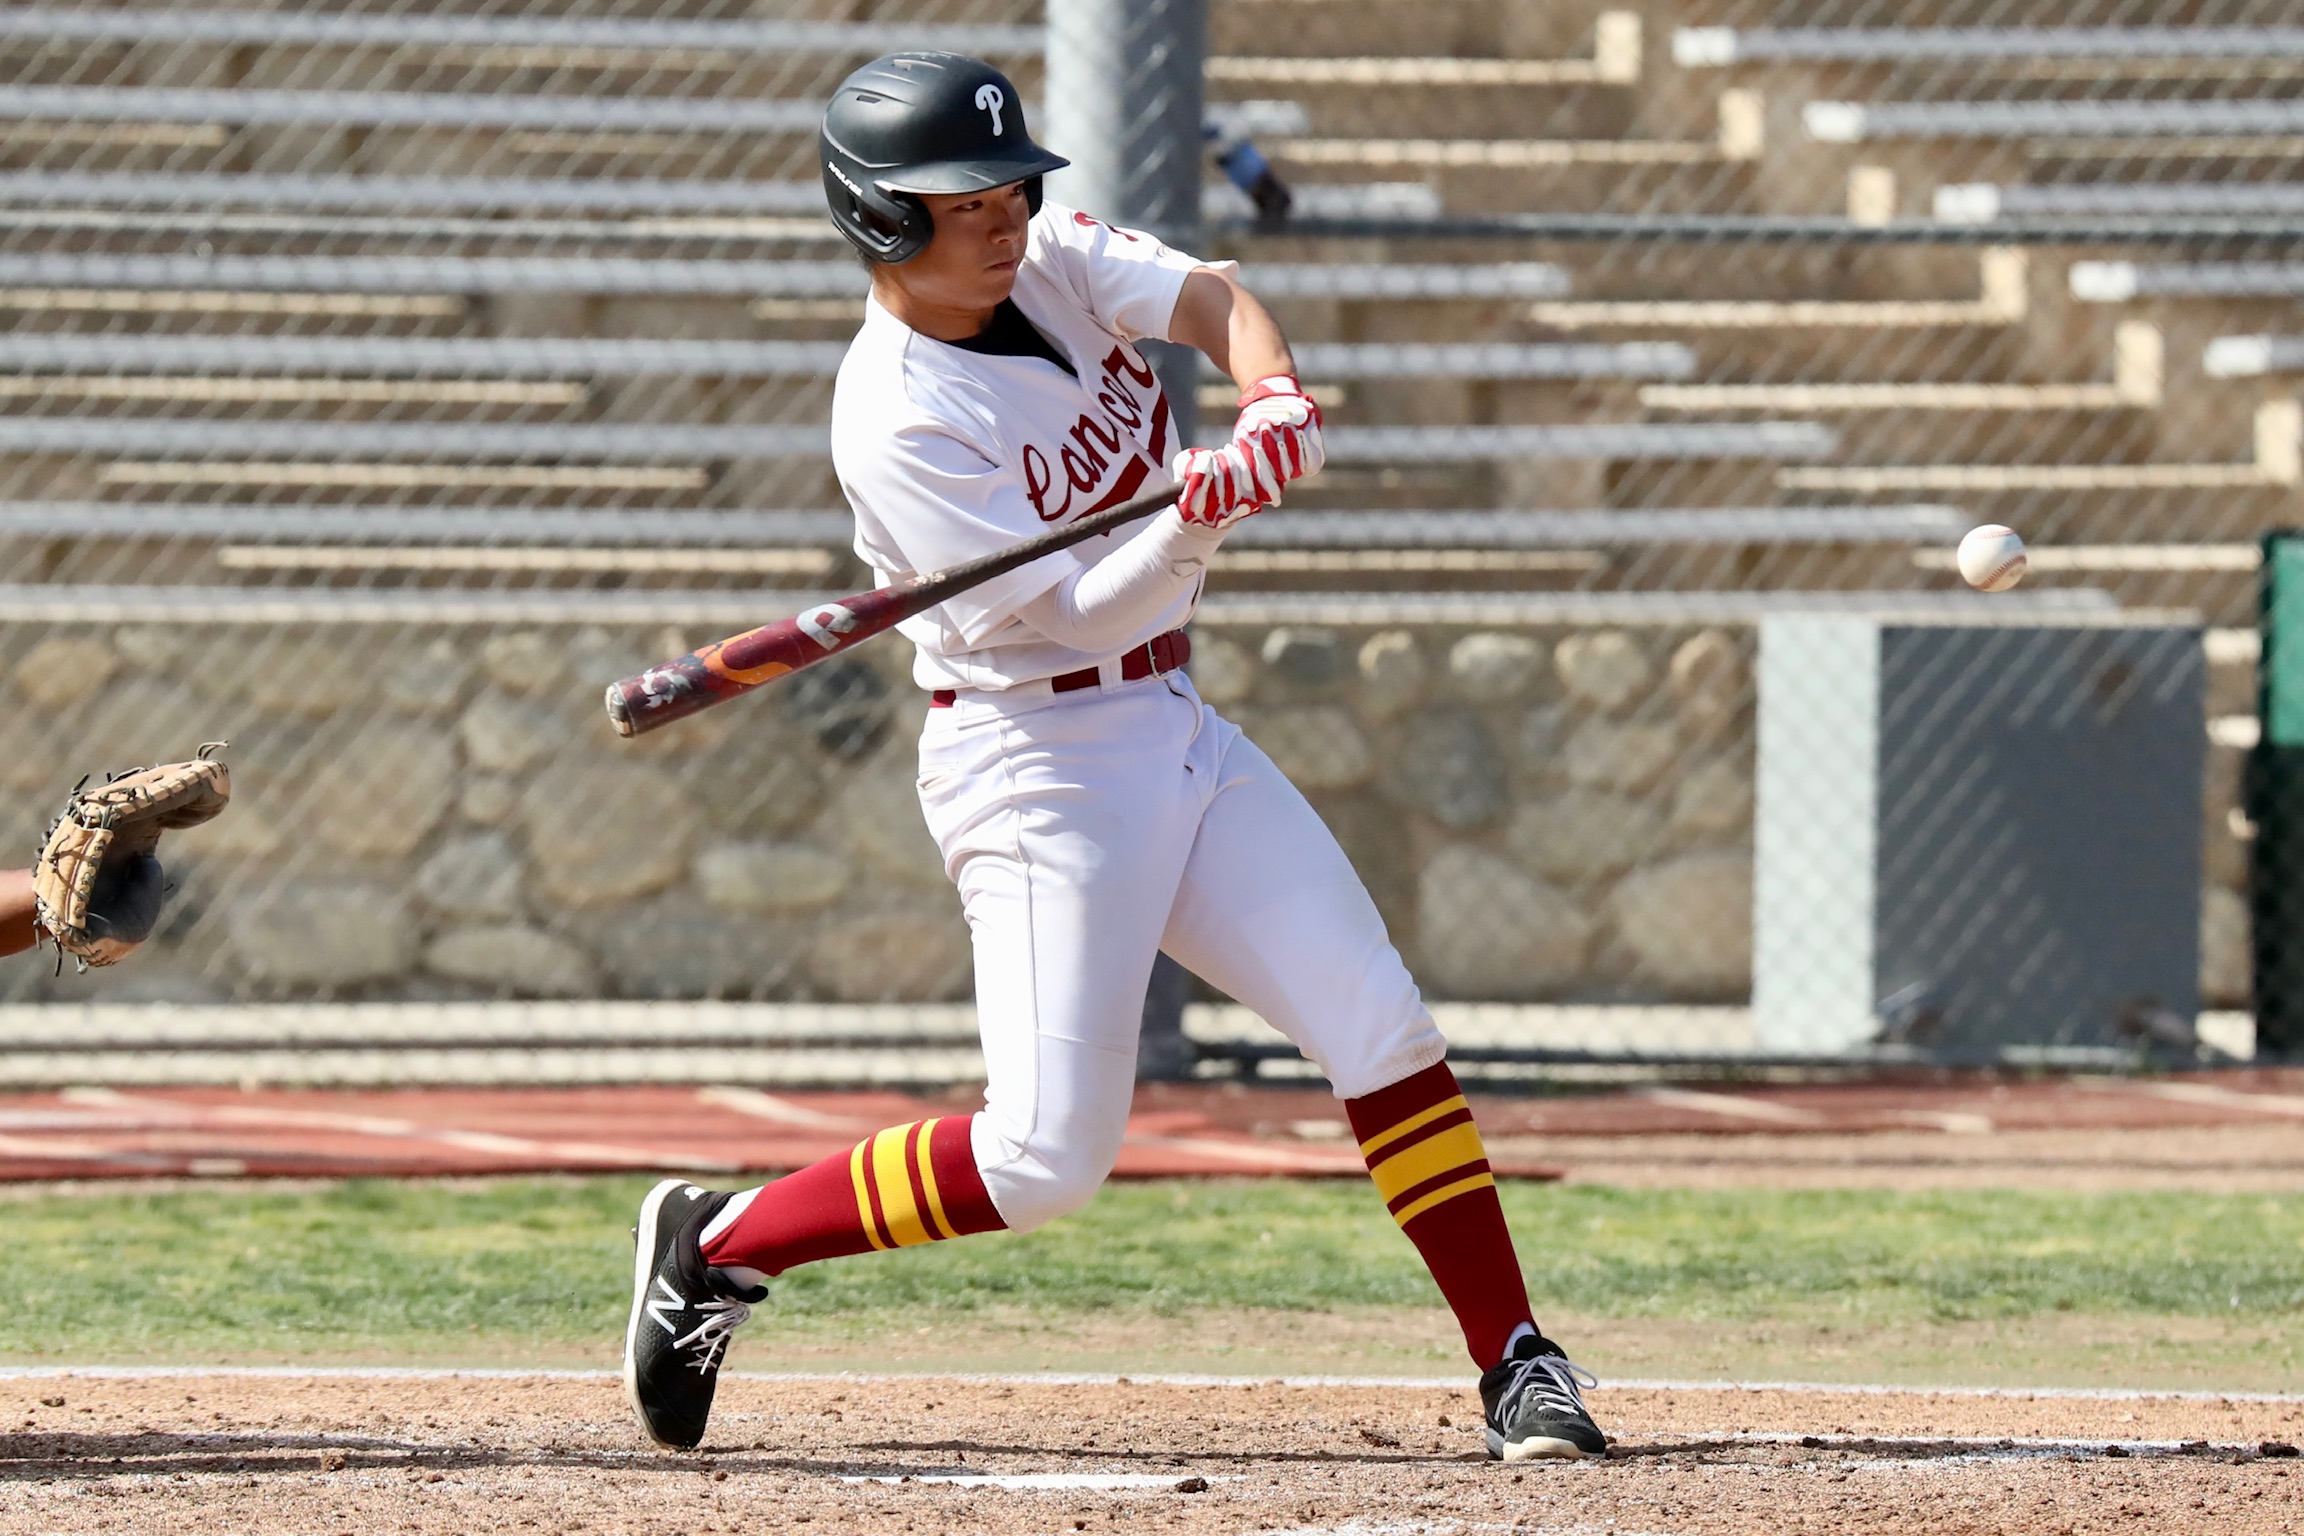 Toshiki Kuriya connects on his home run during PCC's win on Tuesday (photo by Michael Watkins, PCC Athletics).